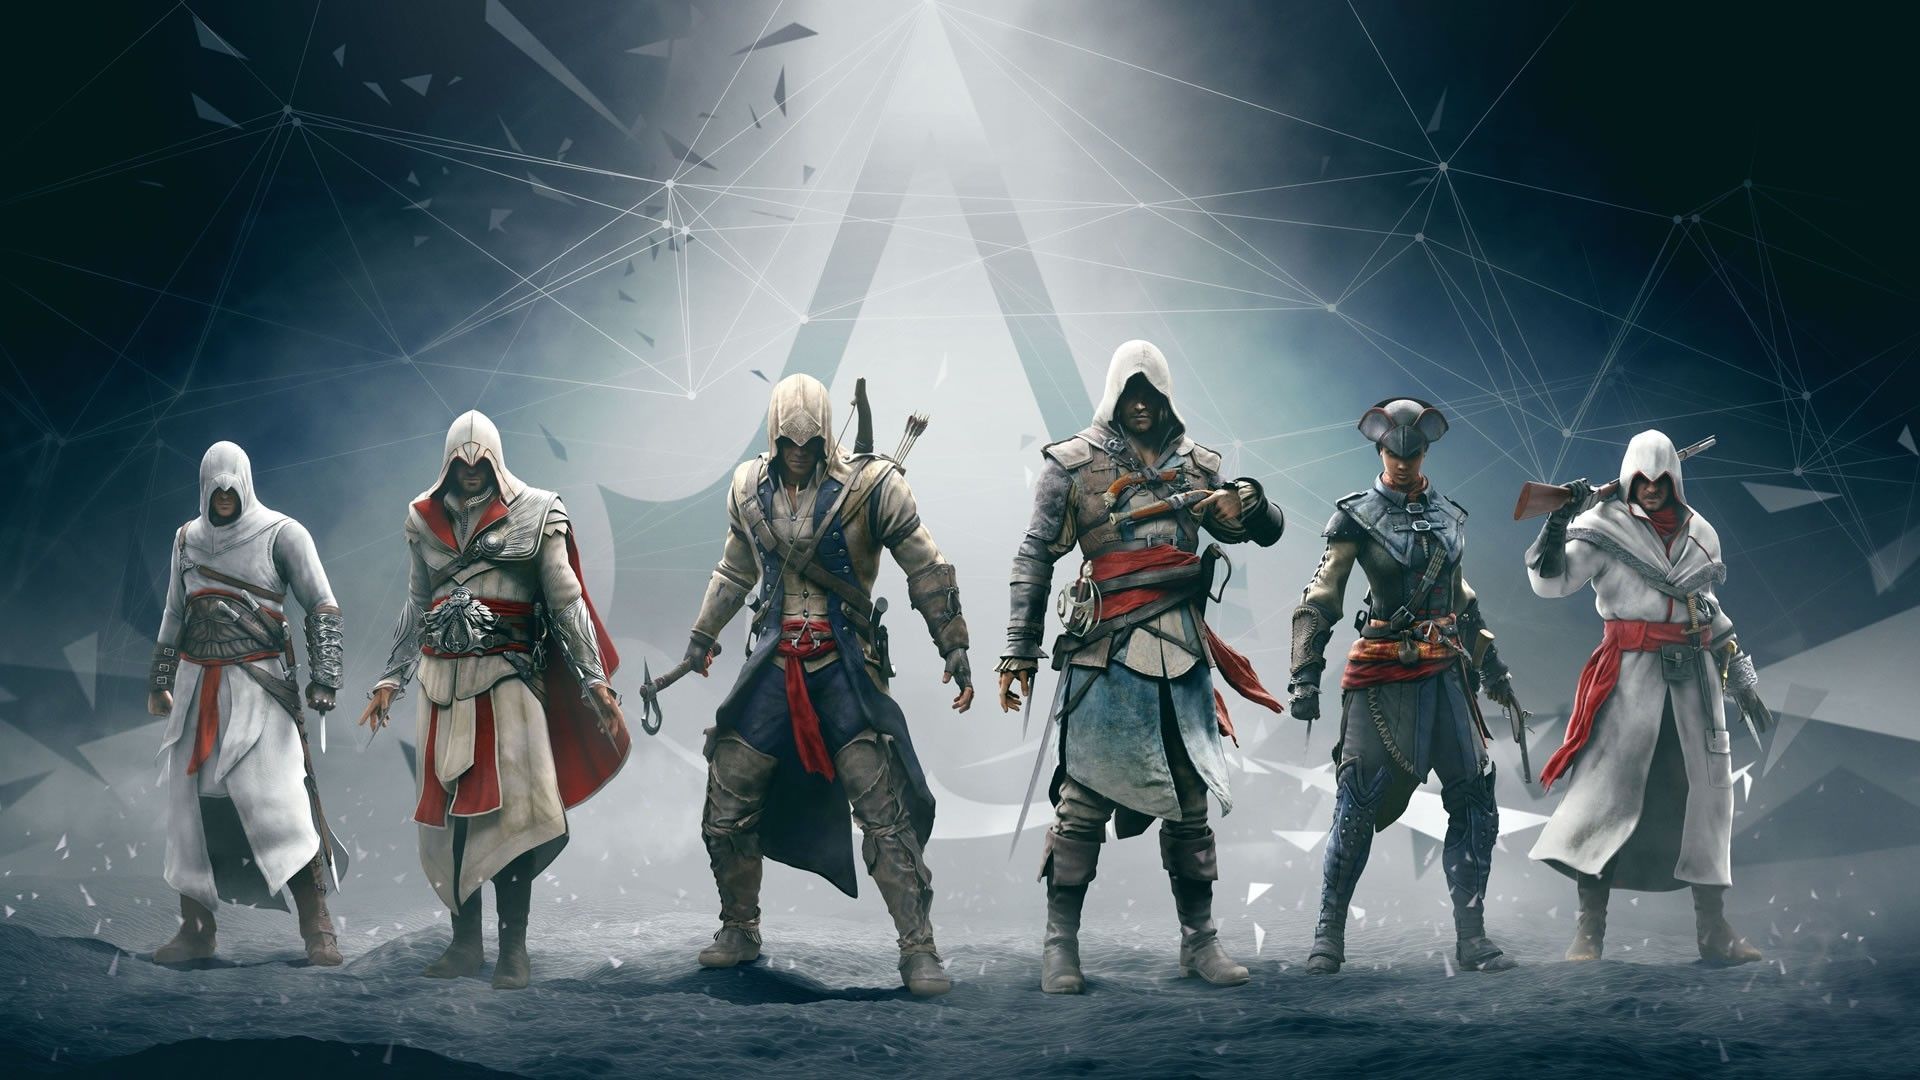 Assassin Creed HD Wallpaper Assassin Creed Images Cool Backgrounds